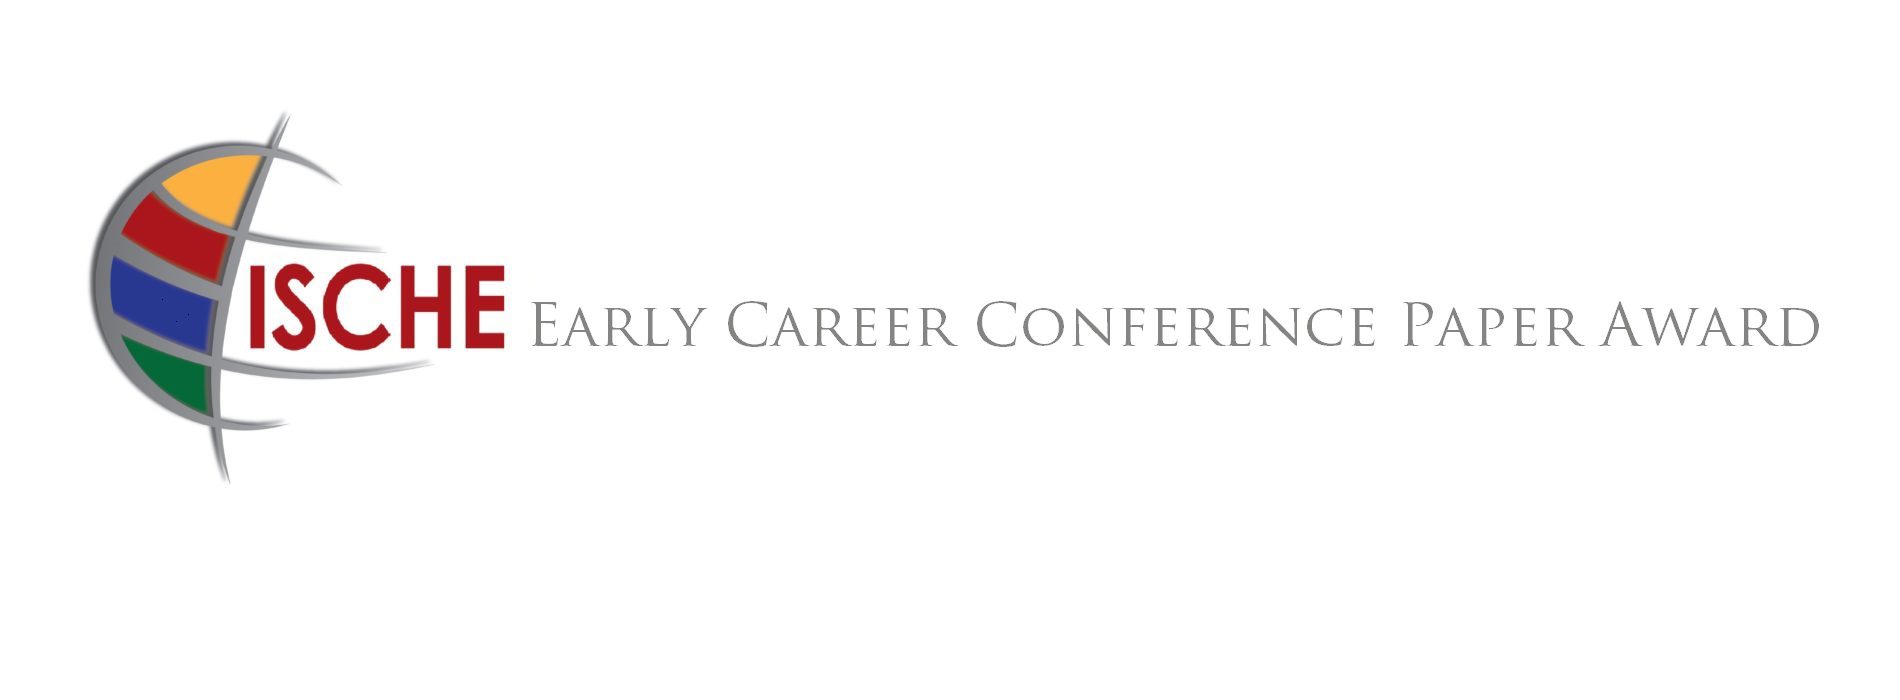 ISCHE Early Career Conference Paper Award